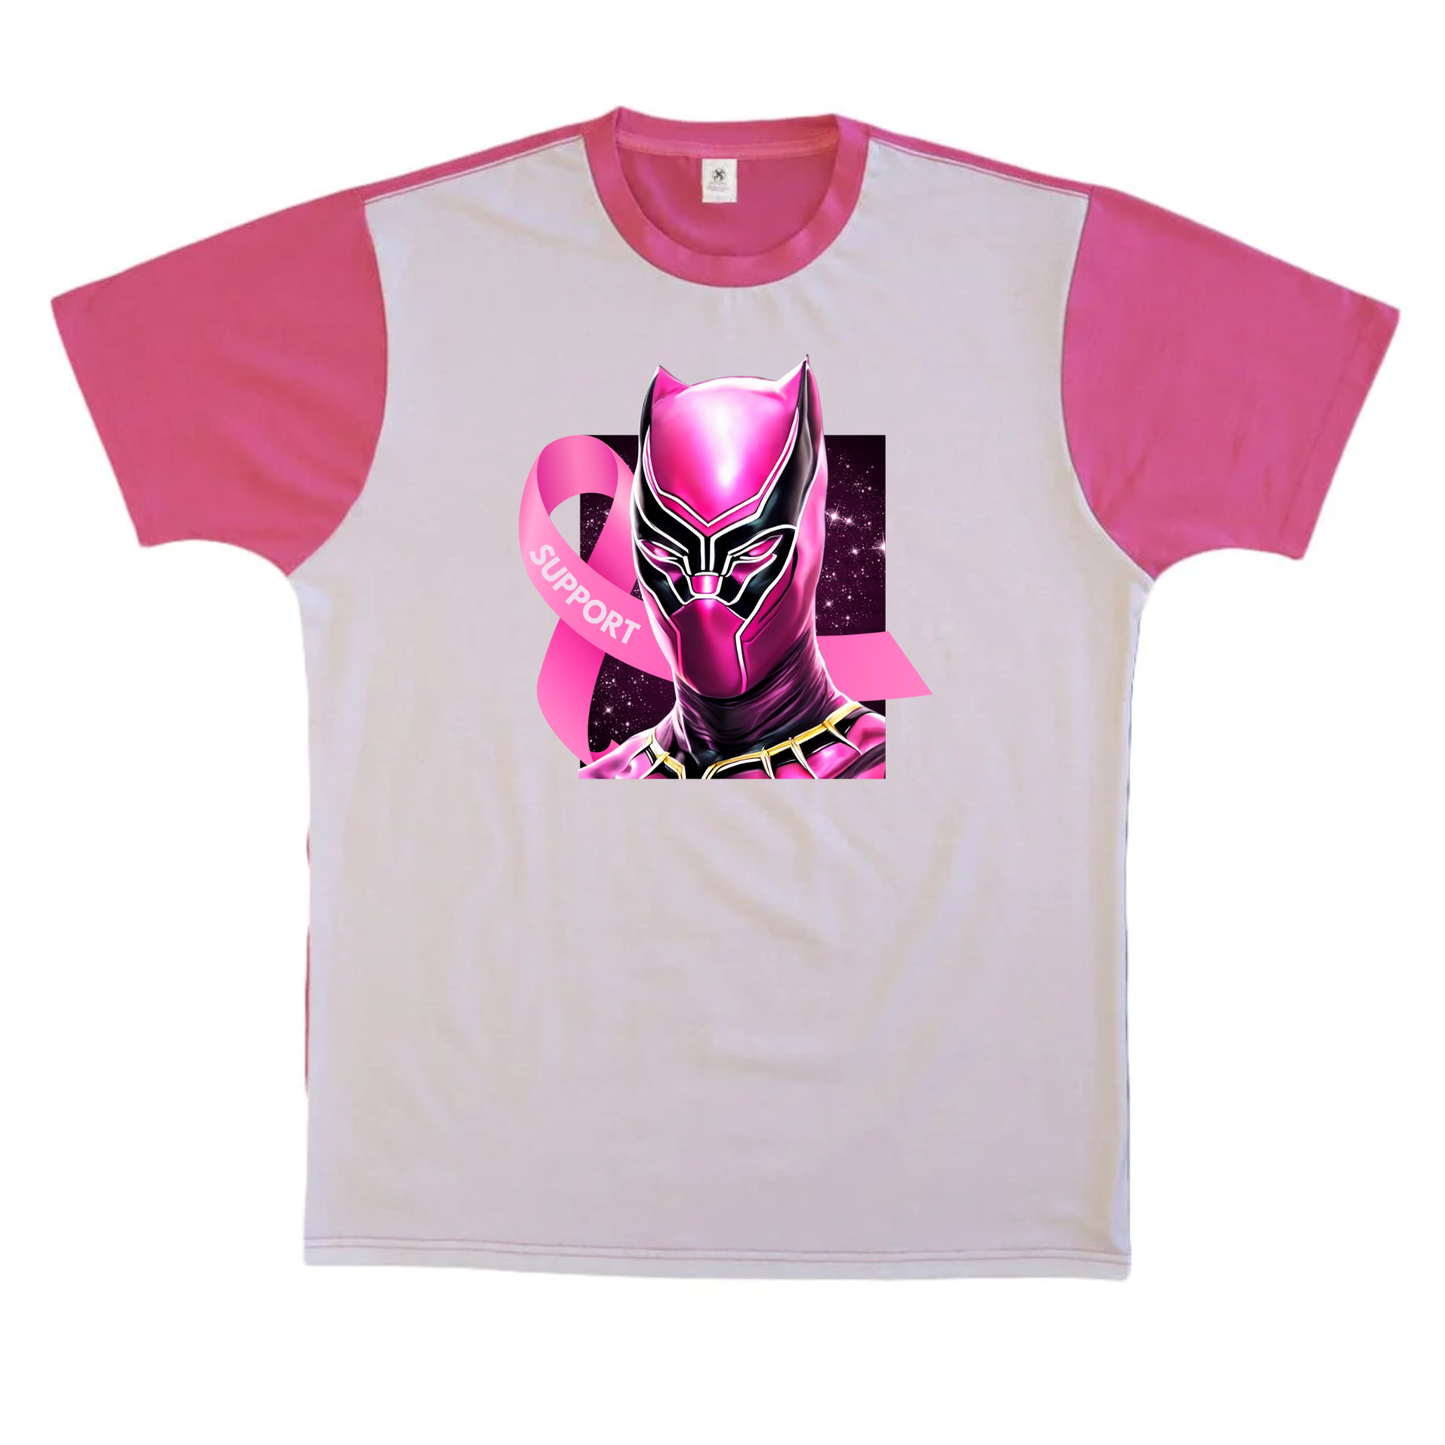 Support Breast Cancer Awareness Black Panther Tshirt